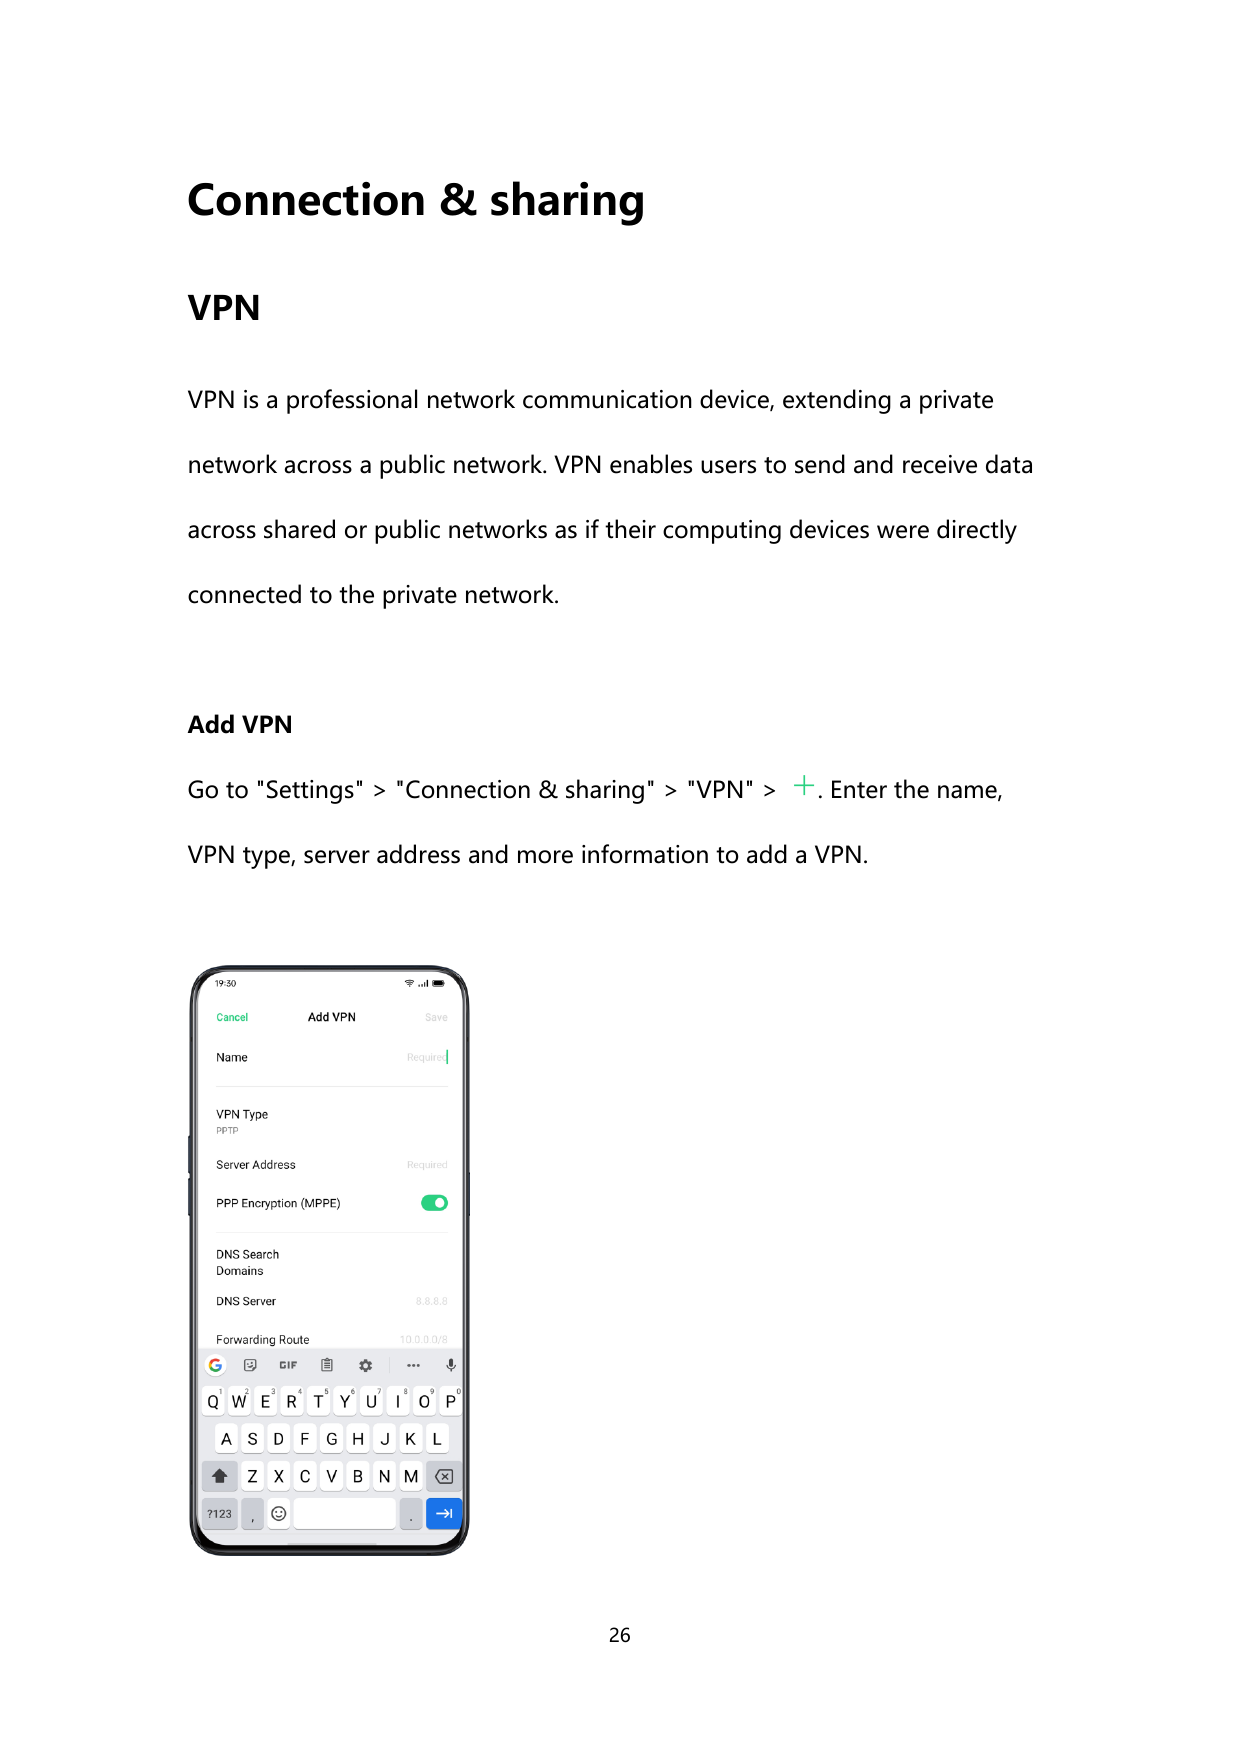 Connection & sharingVPNVPN is a professional network communication device, extending a privatenetwork across a public network. V